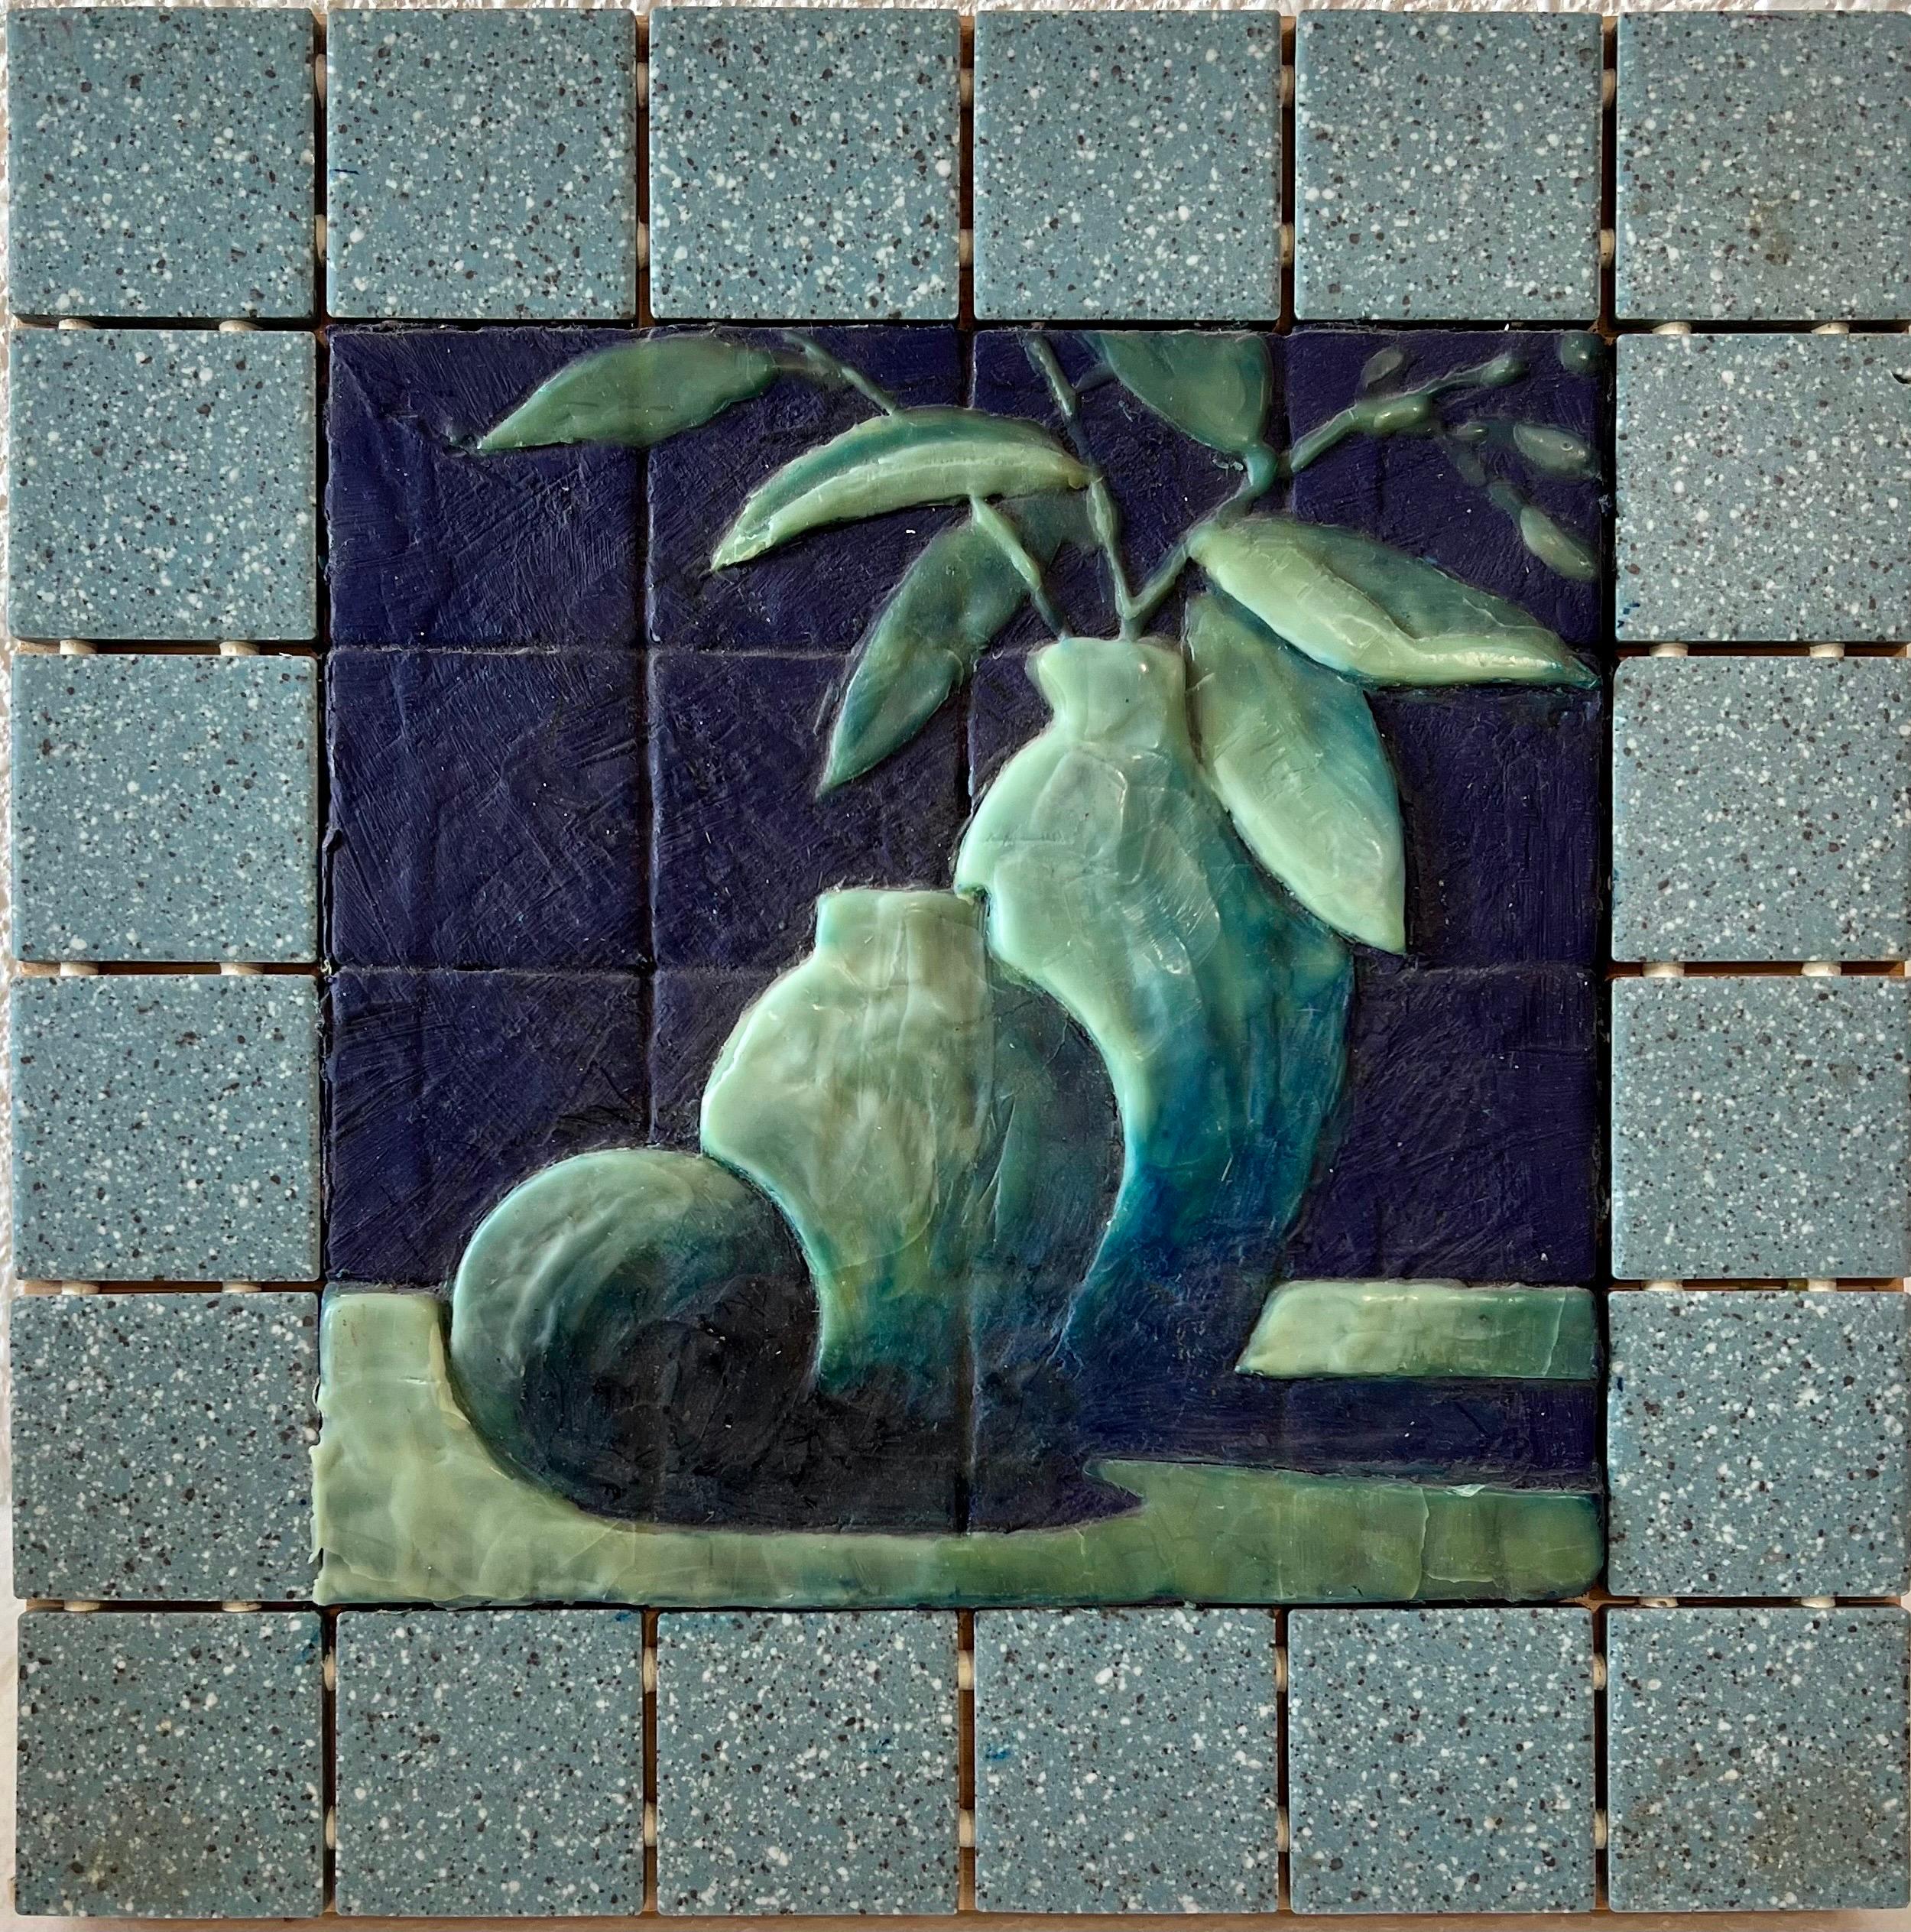 
Joseph Maresca (American, b. 1946).
Still life rendering on wood mounted tiles. 
Flowers, Plant and fruits. 
Green X Ray
Oil and wax encaustic on tile
Gallery label and hanging wire at back.

Dimensions:
Height: 12 inches / 30.48 cm
Width: 12